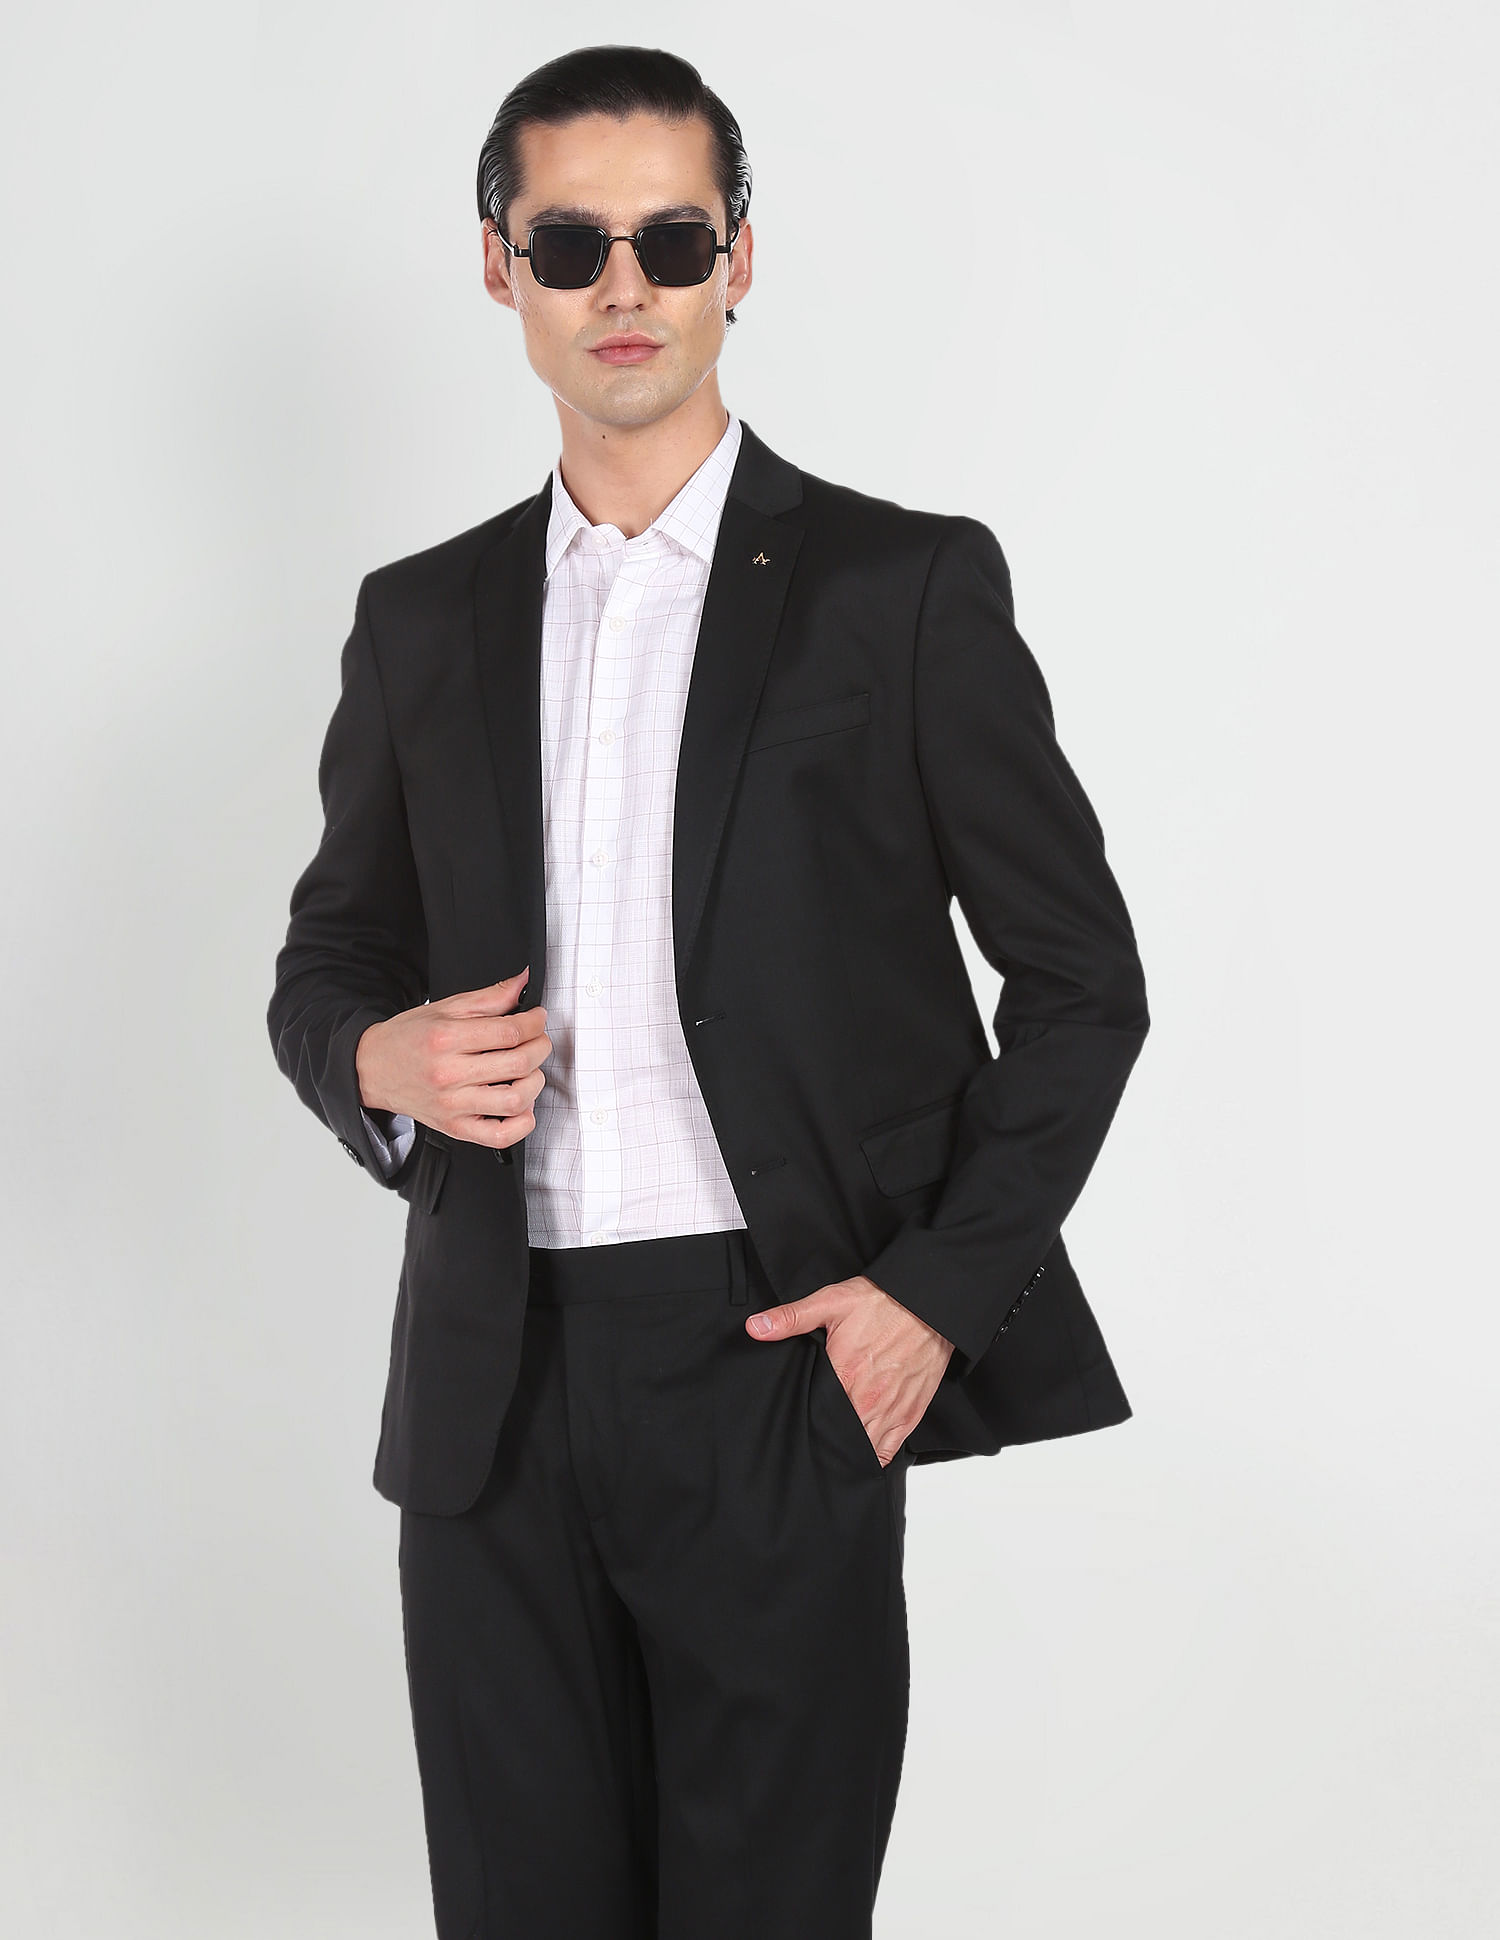 Regular Fit Pure Wool Suit Trousers